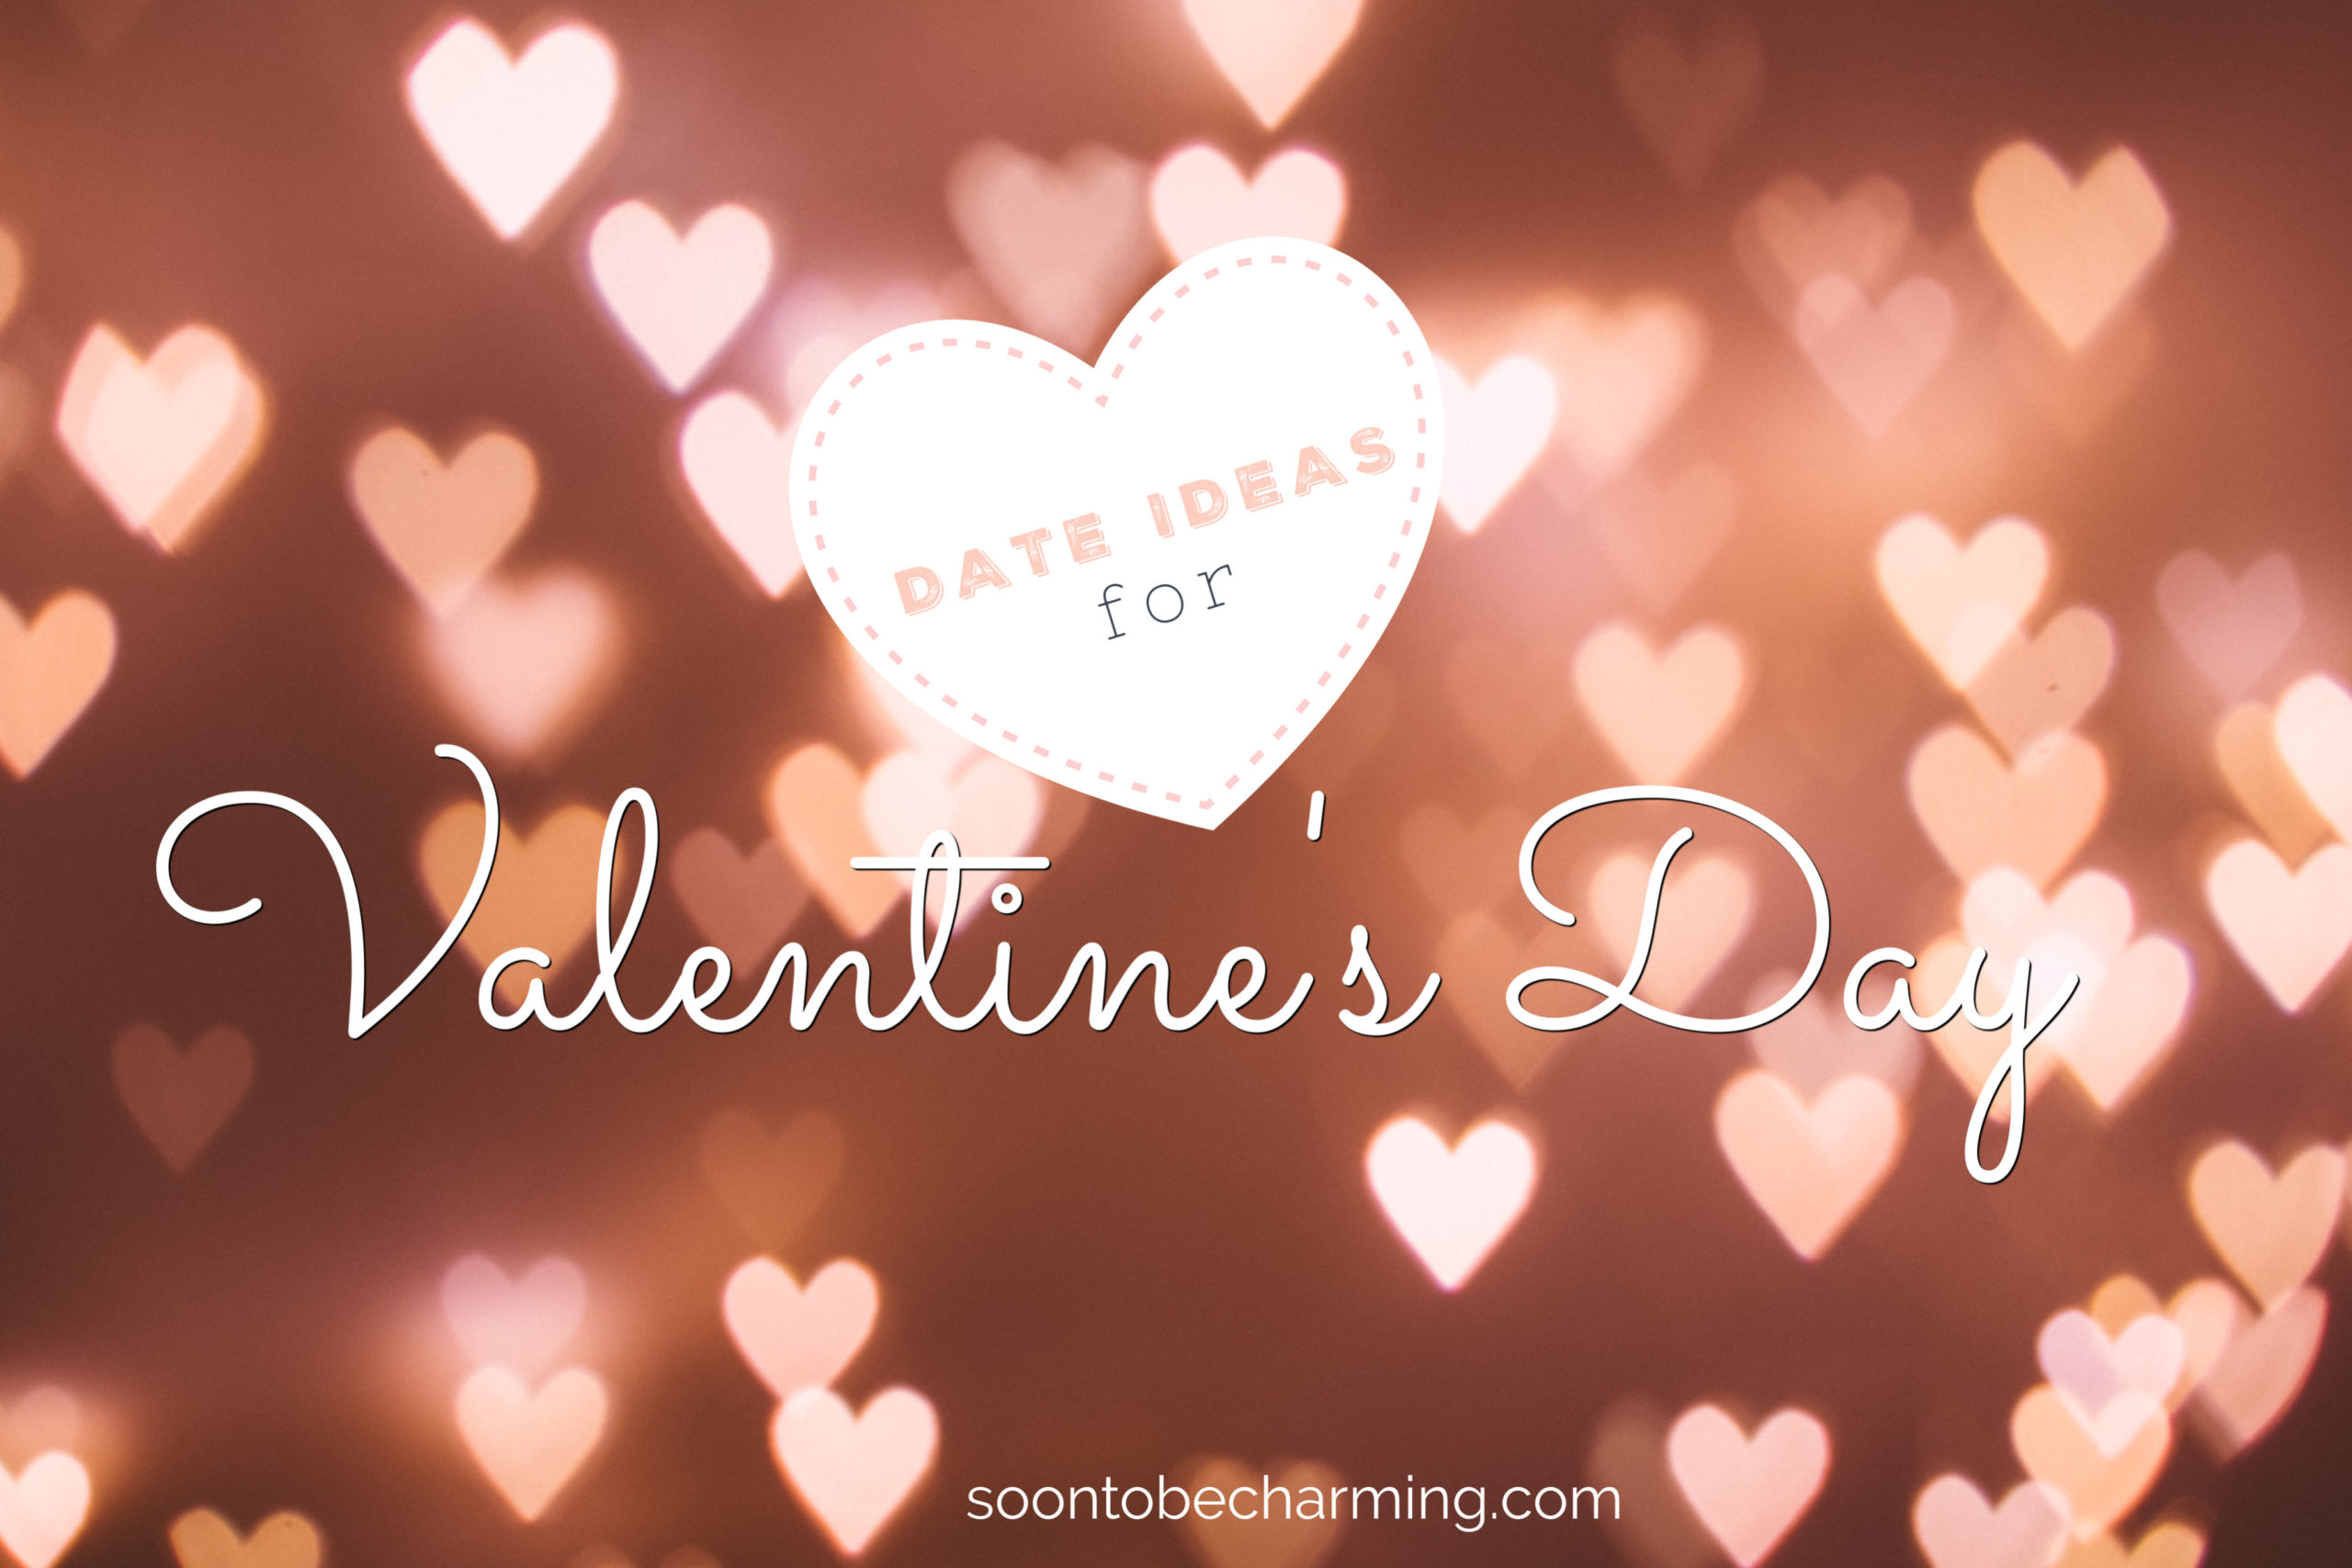 Date Ideas For Valentine’s Day